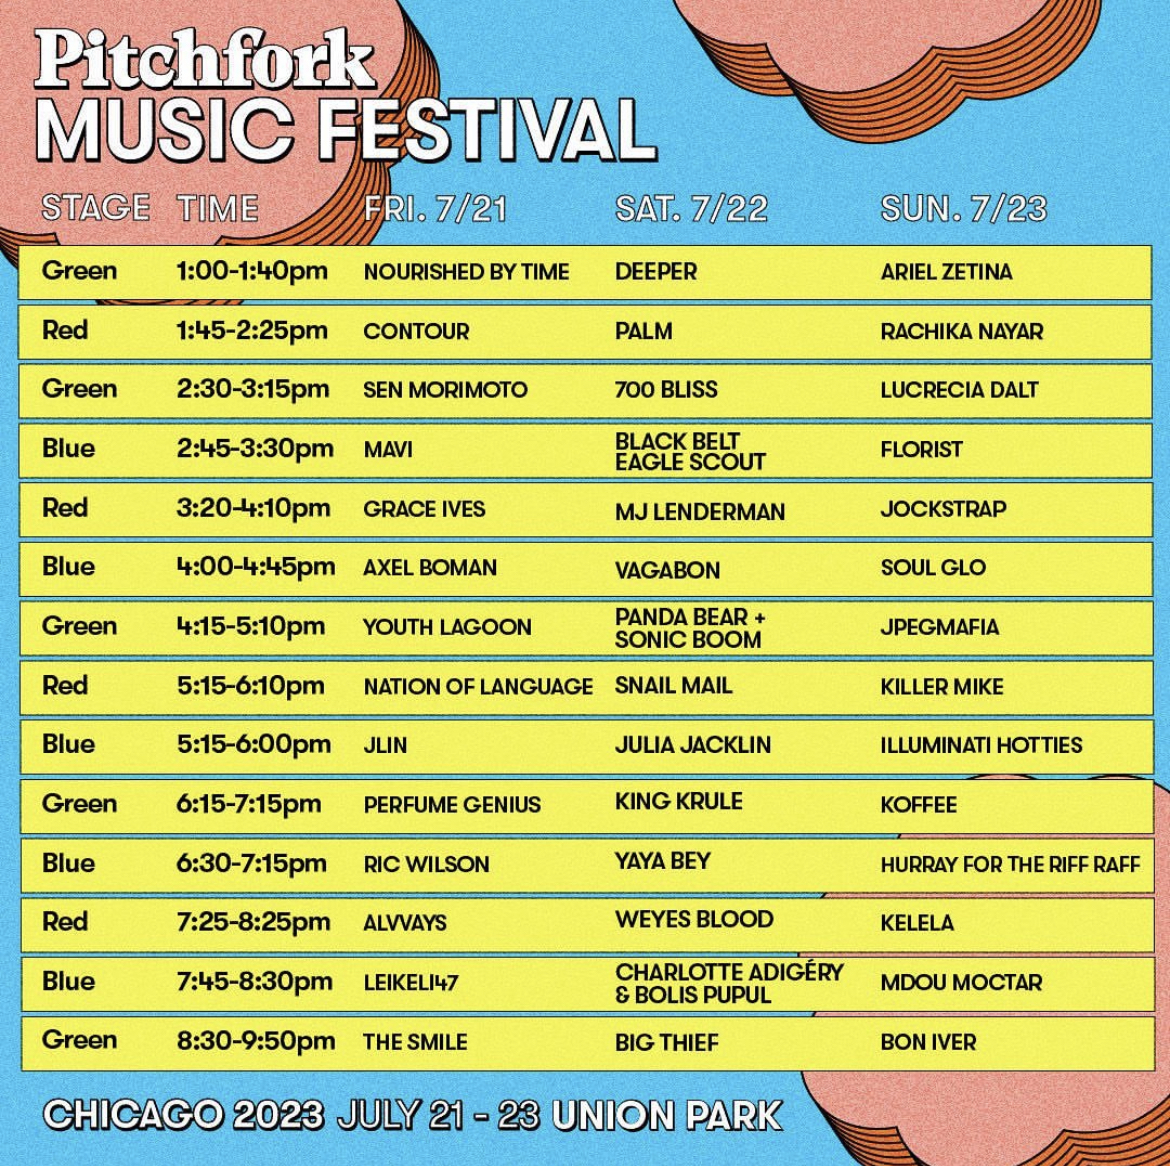 Graphic+Courtesy+of+Pitchfork+Music+Festival